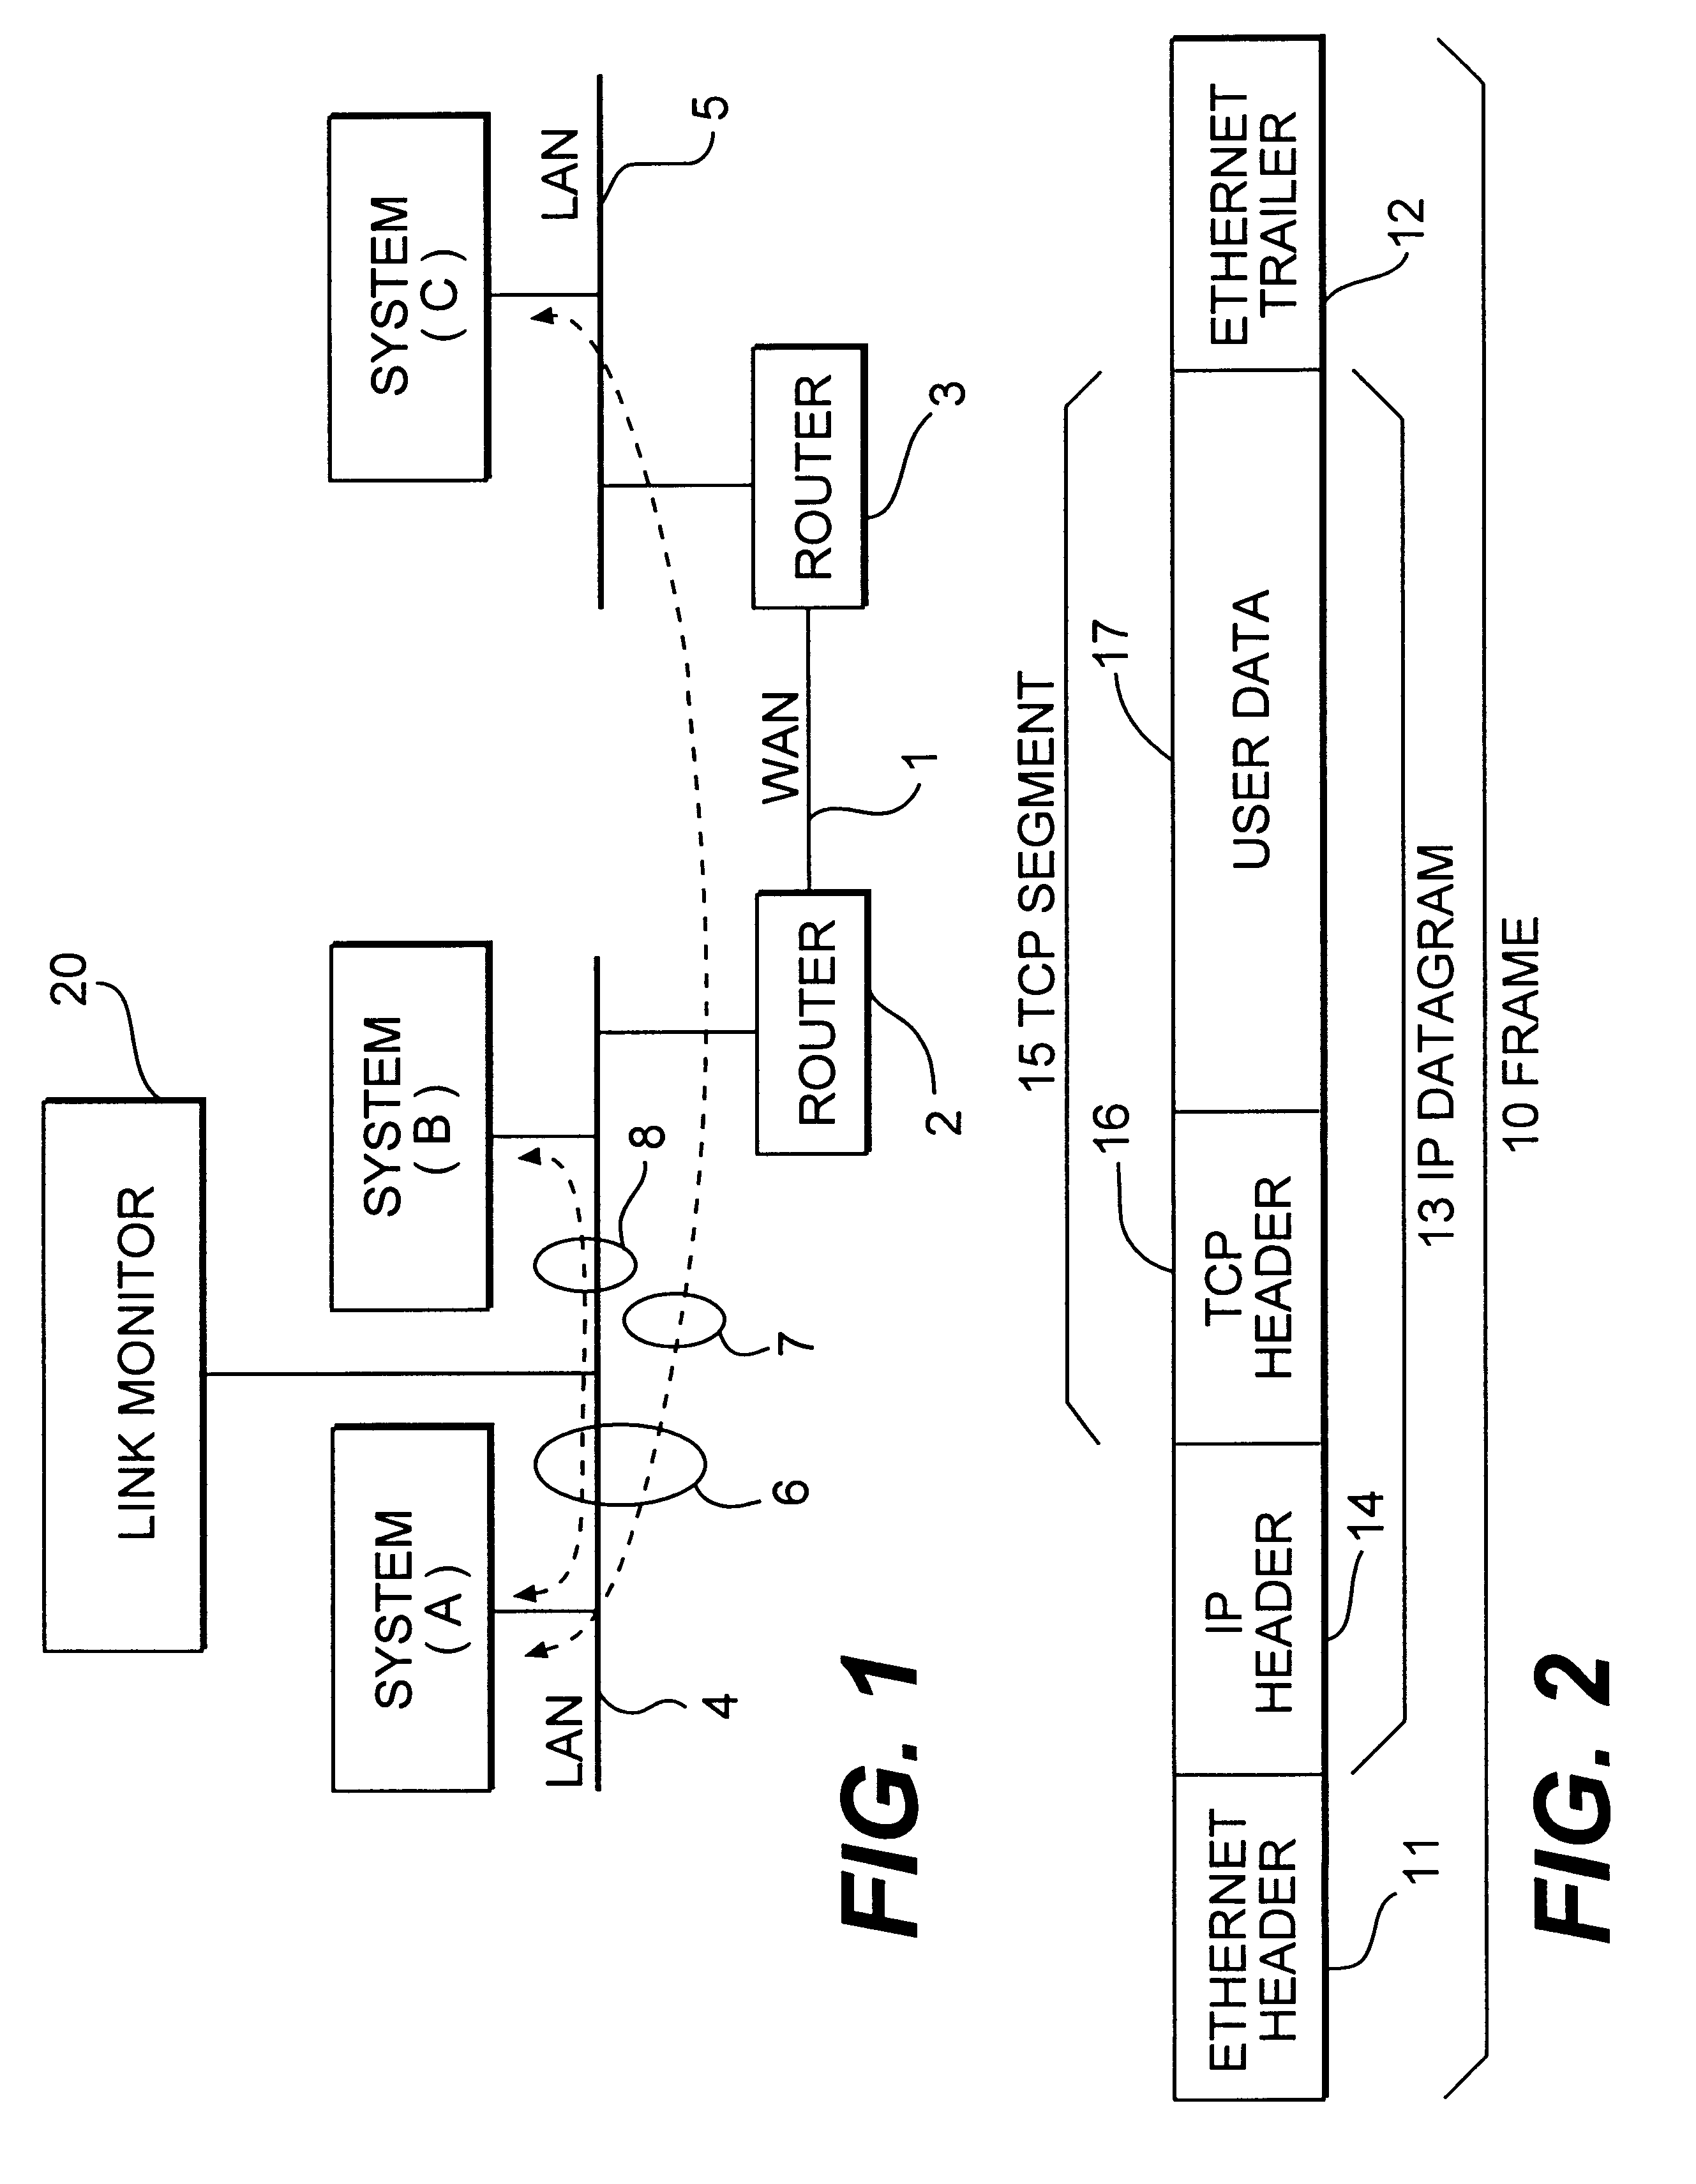 Method and apparatus for monitoring a communication link based on TCP/IP protocol by emulating behavior of the TCP protocol